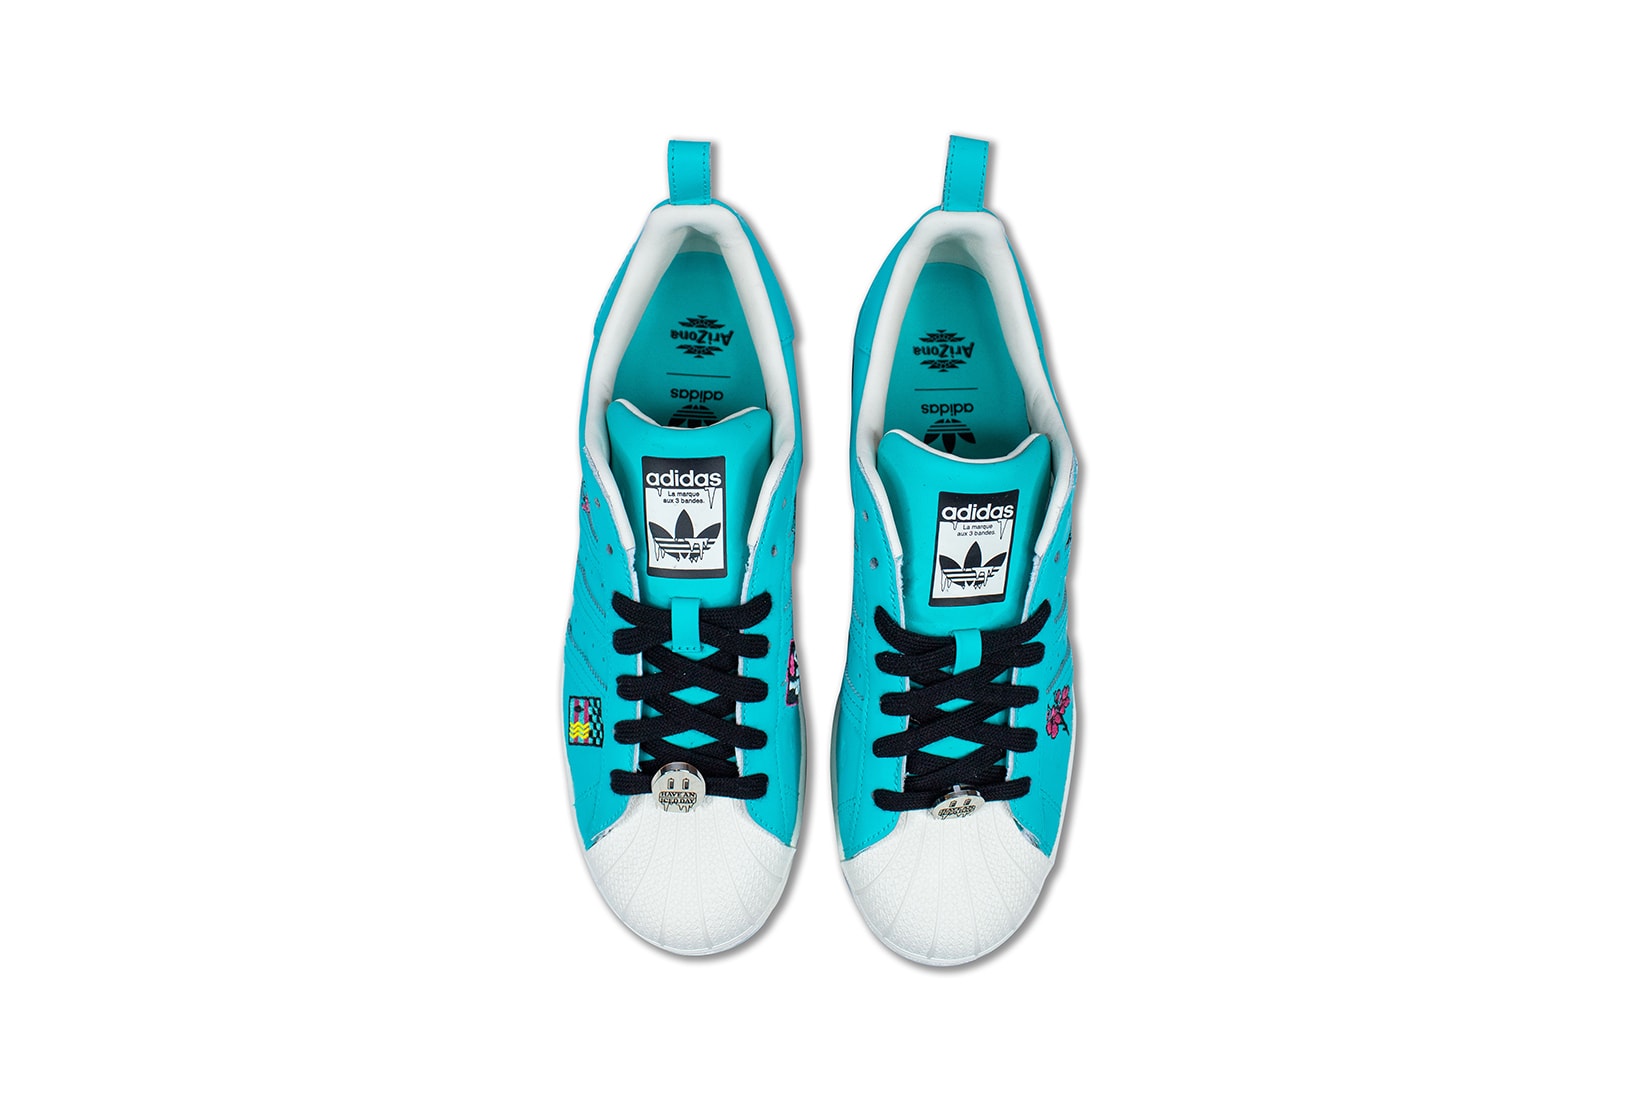 adidas originals arizona iced tea superstar collaboration sneakers big cans aerial birds eye view laces insole black blue white